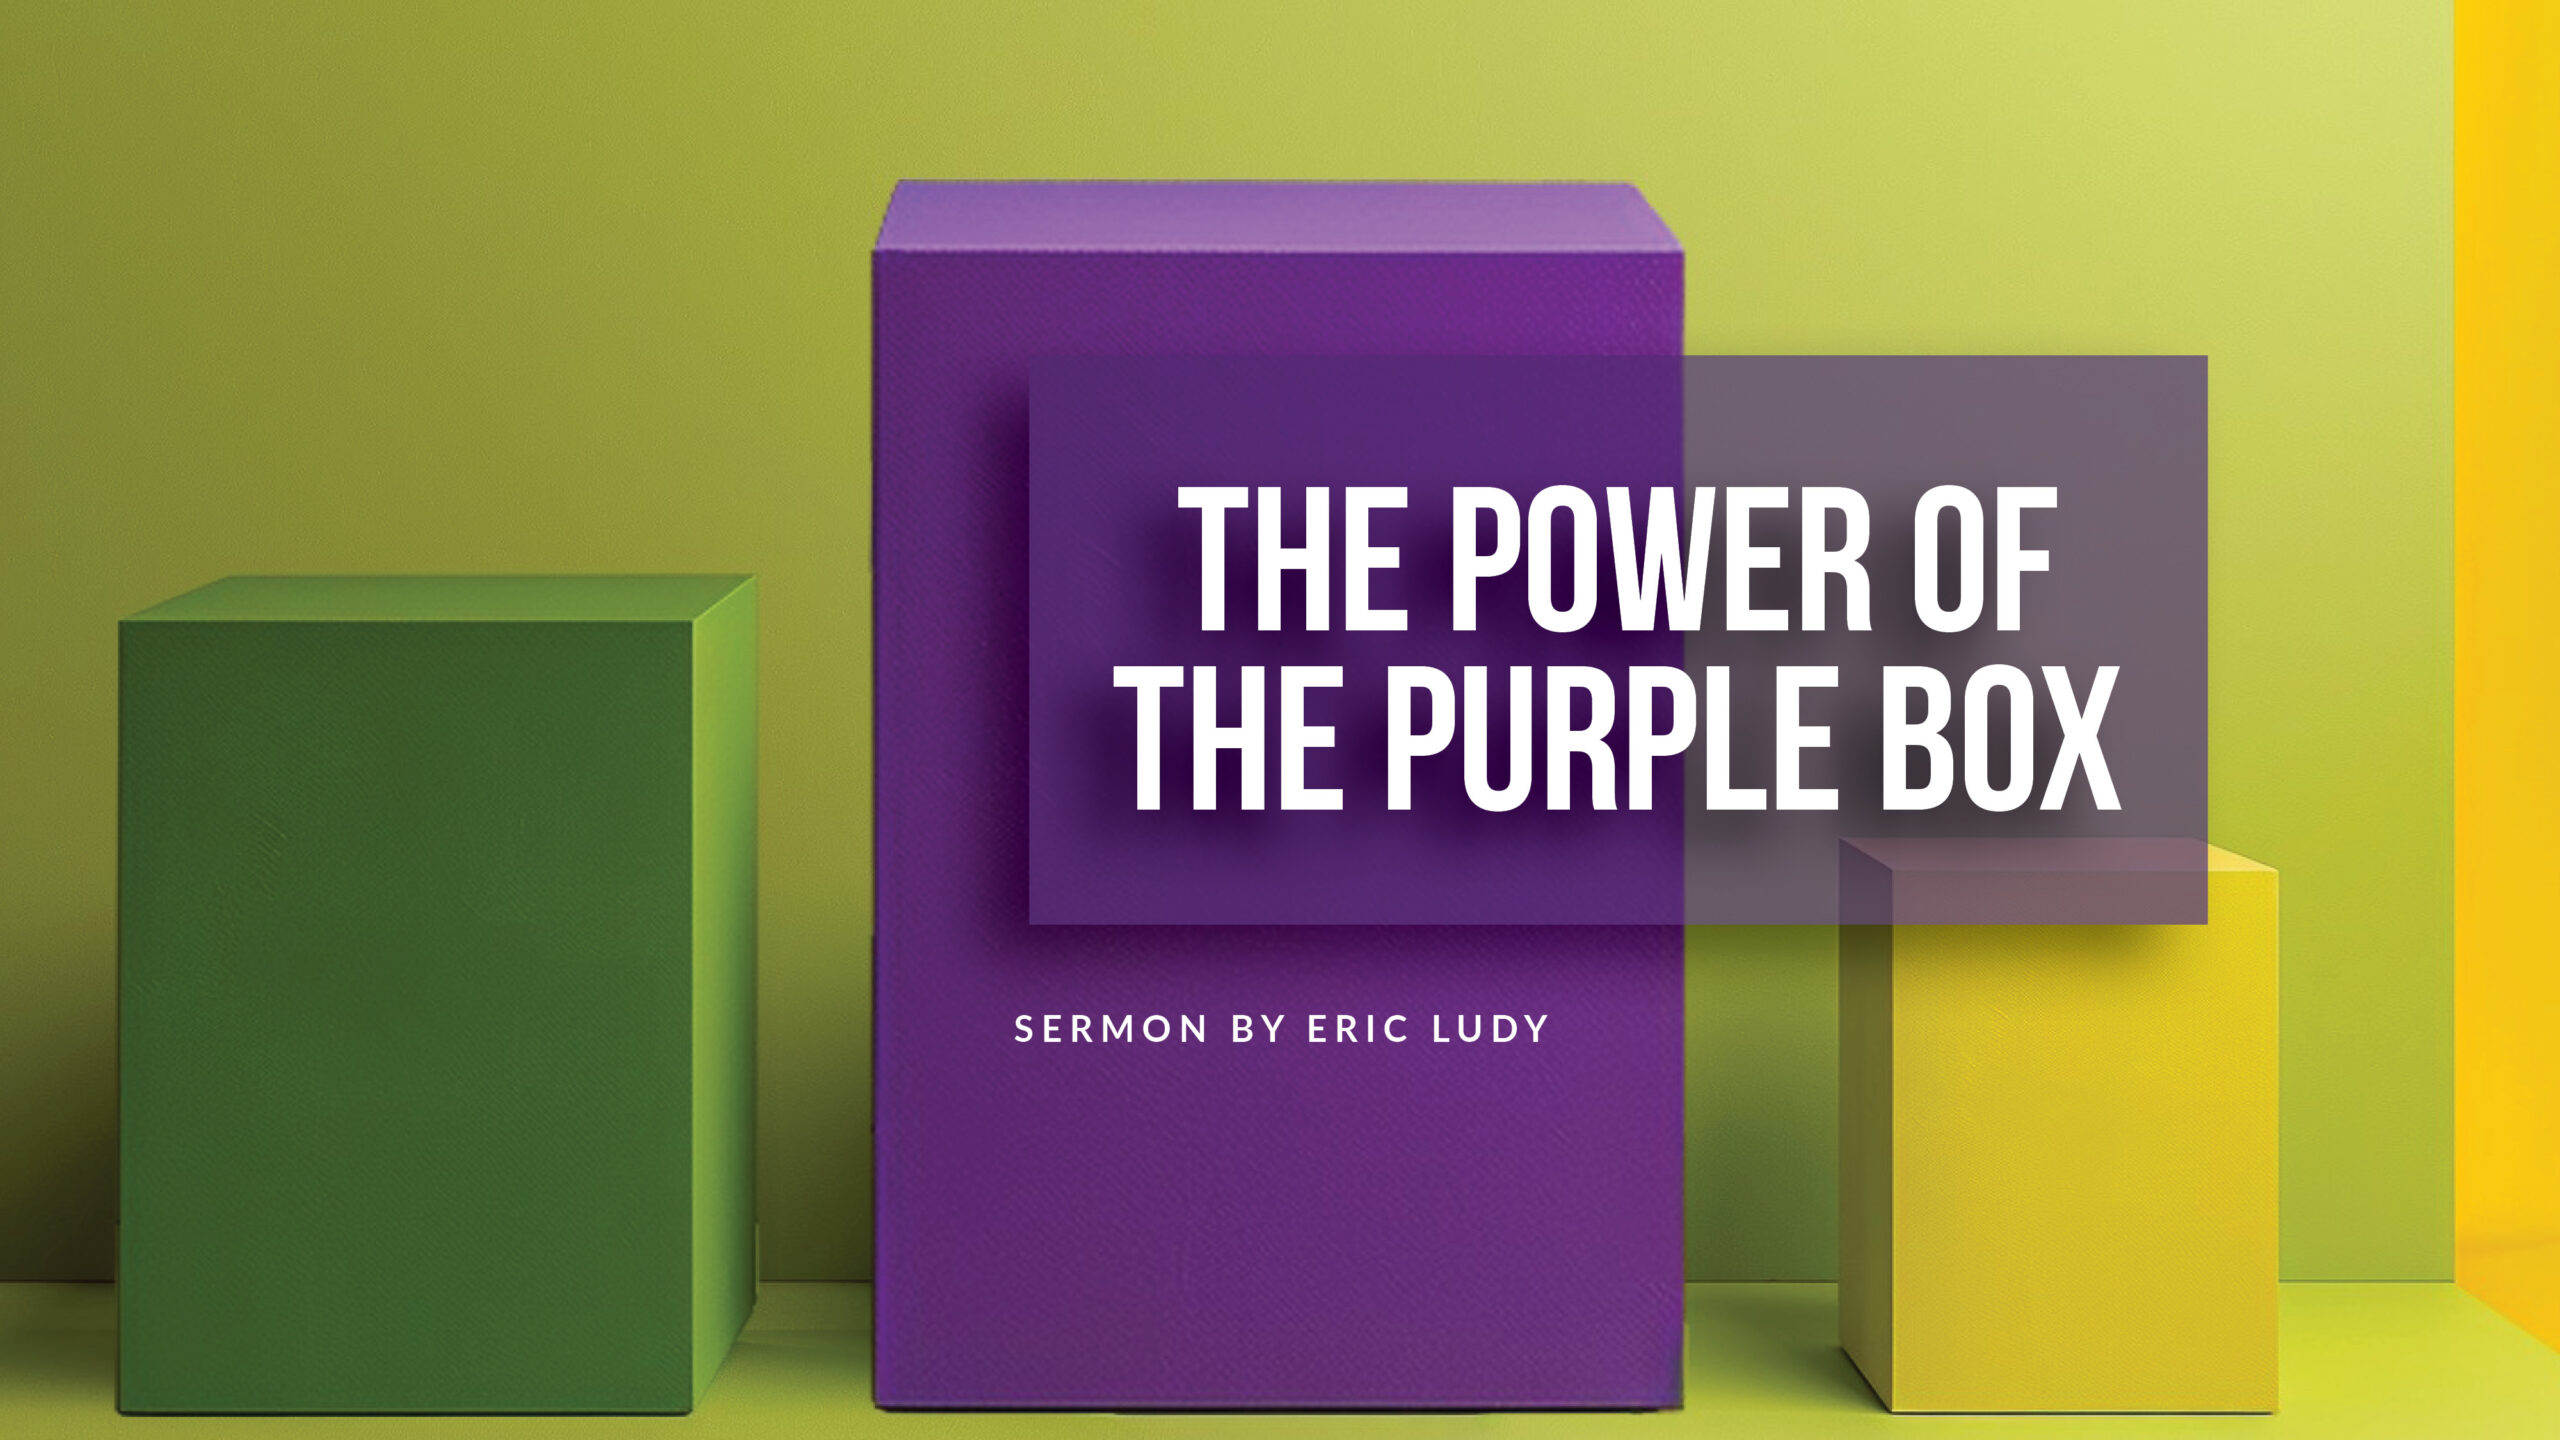 The Power of the Purple Box